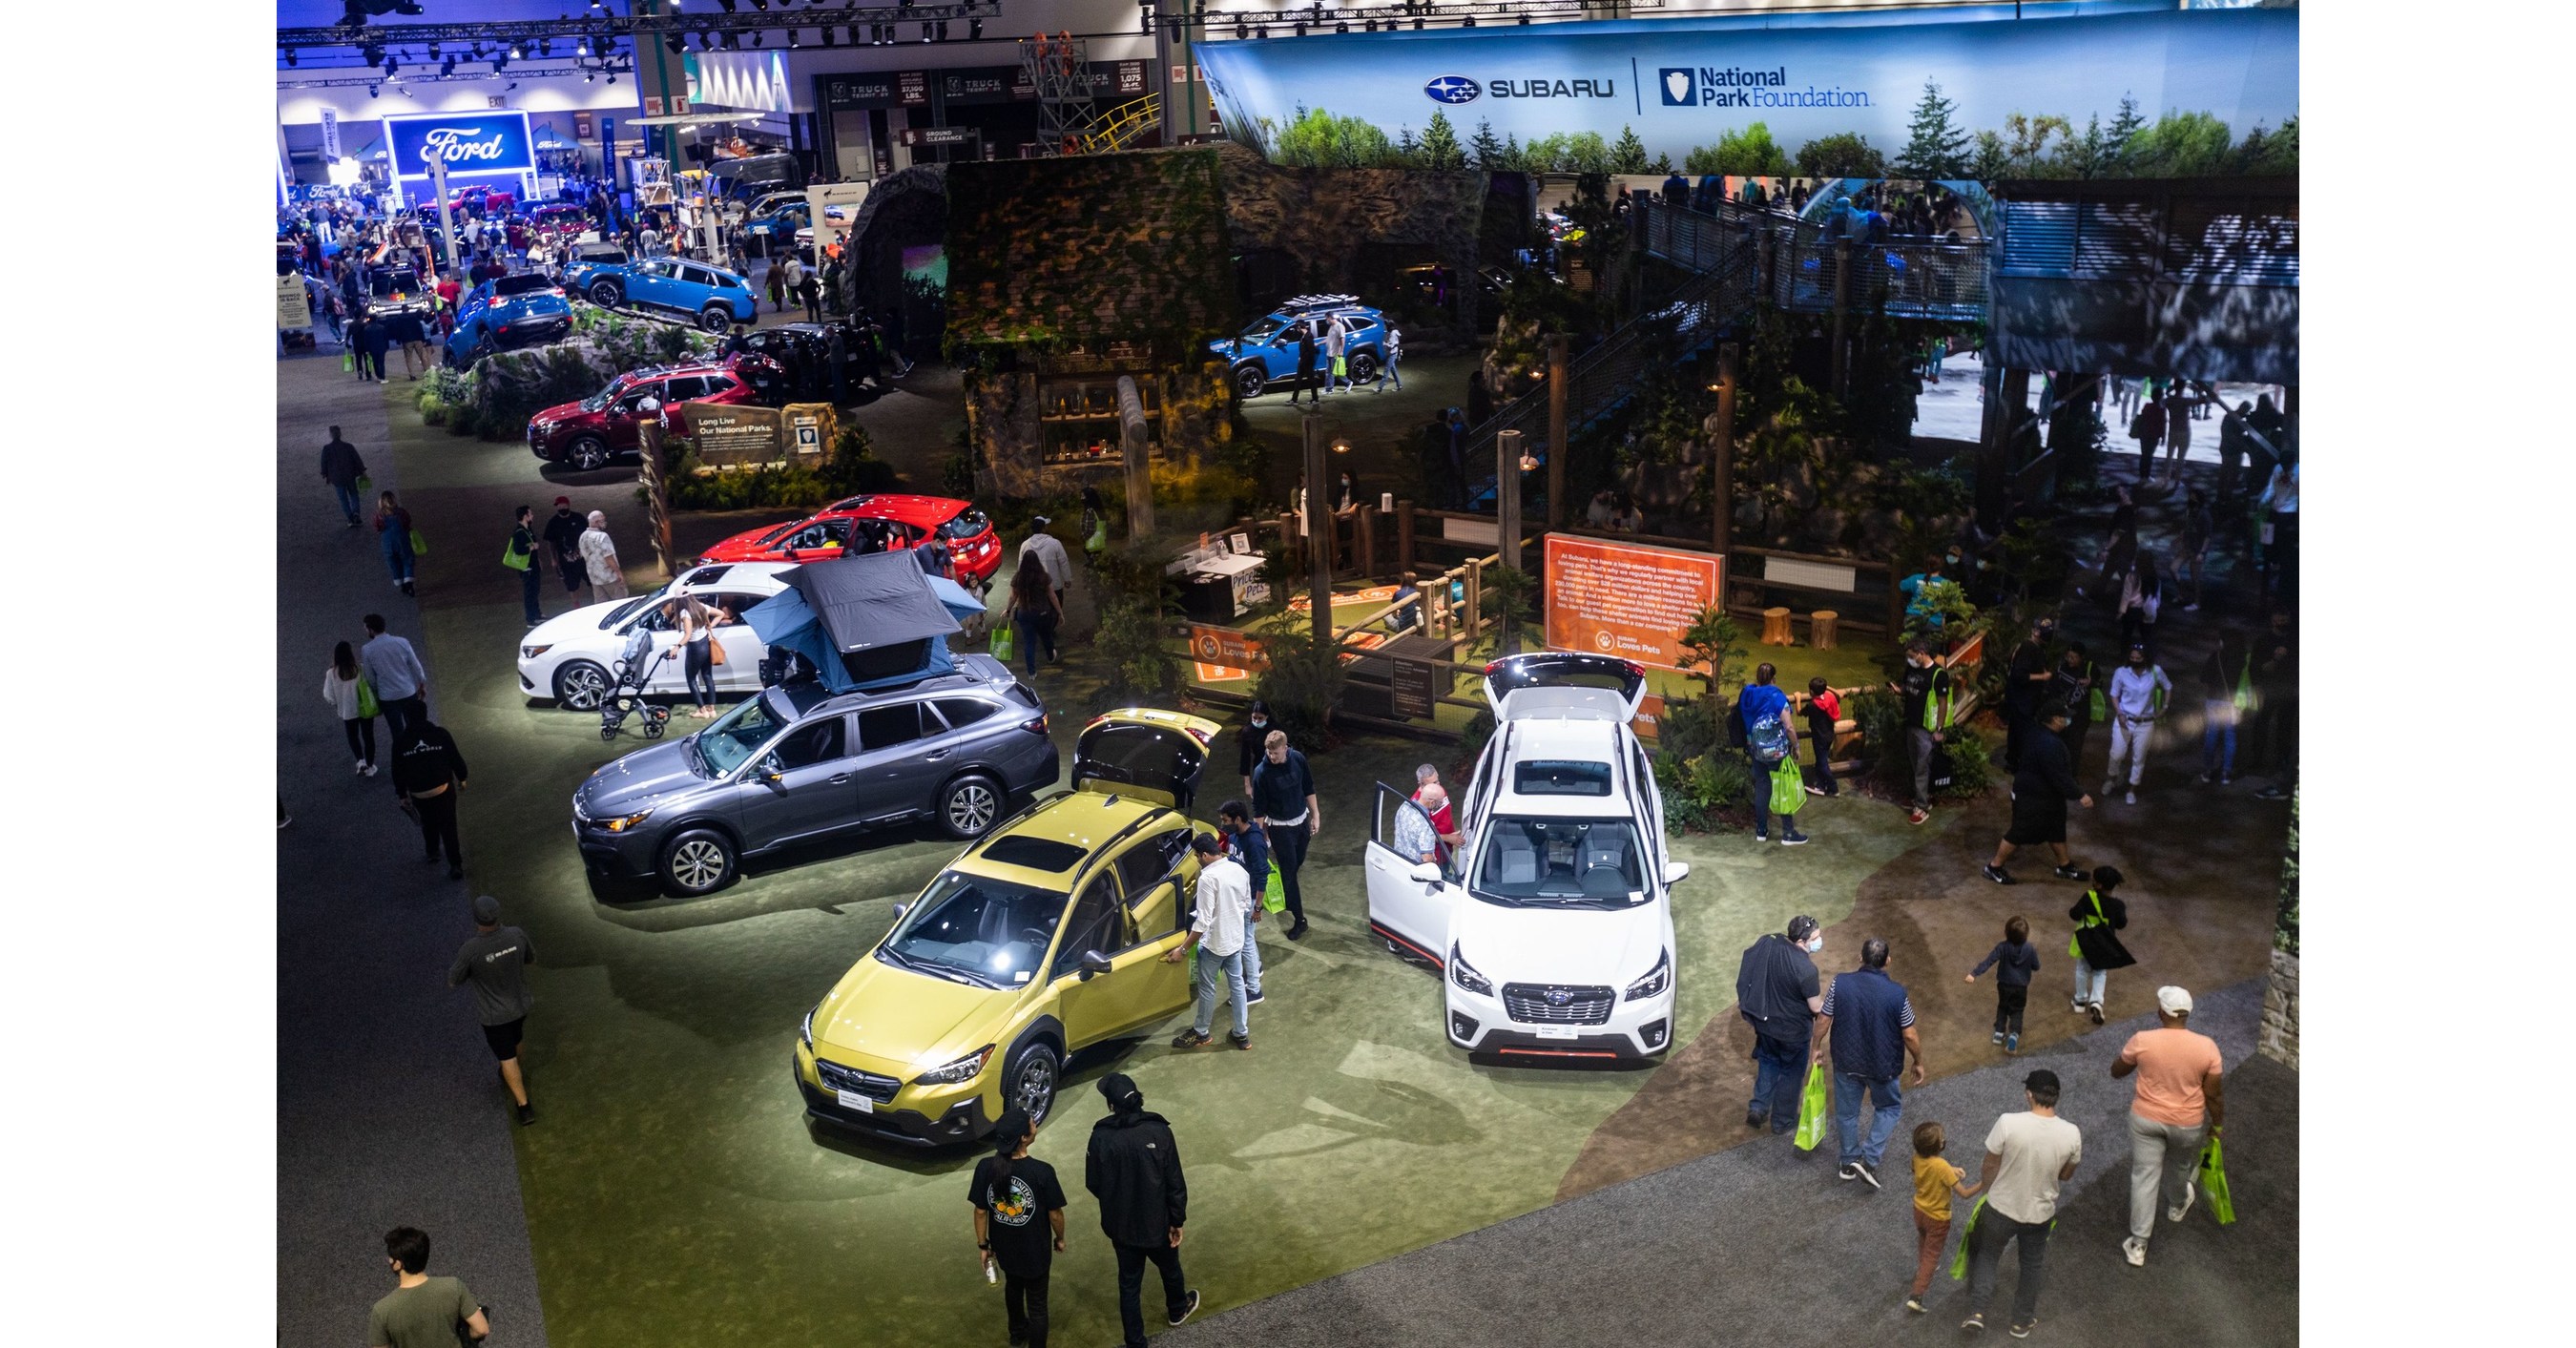 Los Angeles Auto Show® Confirms Industry-Leading Selection of Brand Exhibits and Record-Setting Number of Indoor and Outdoor Driving Experiences